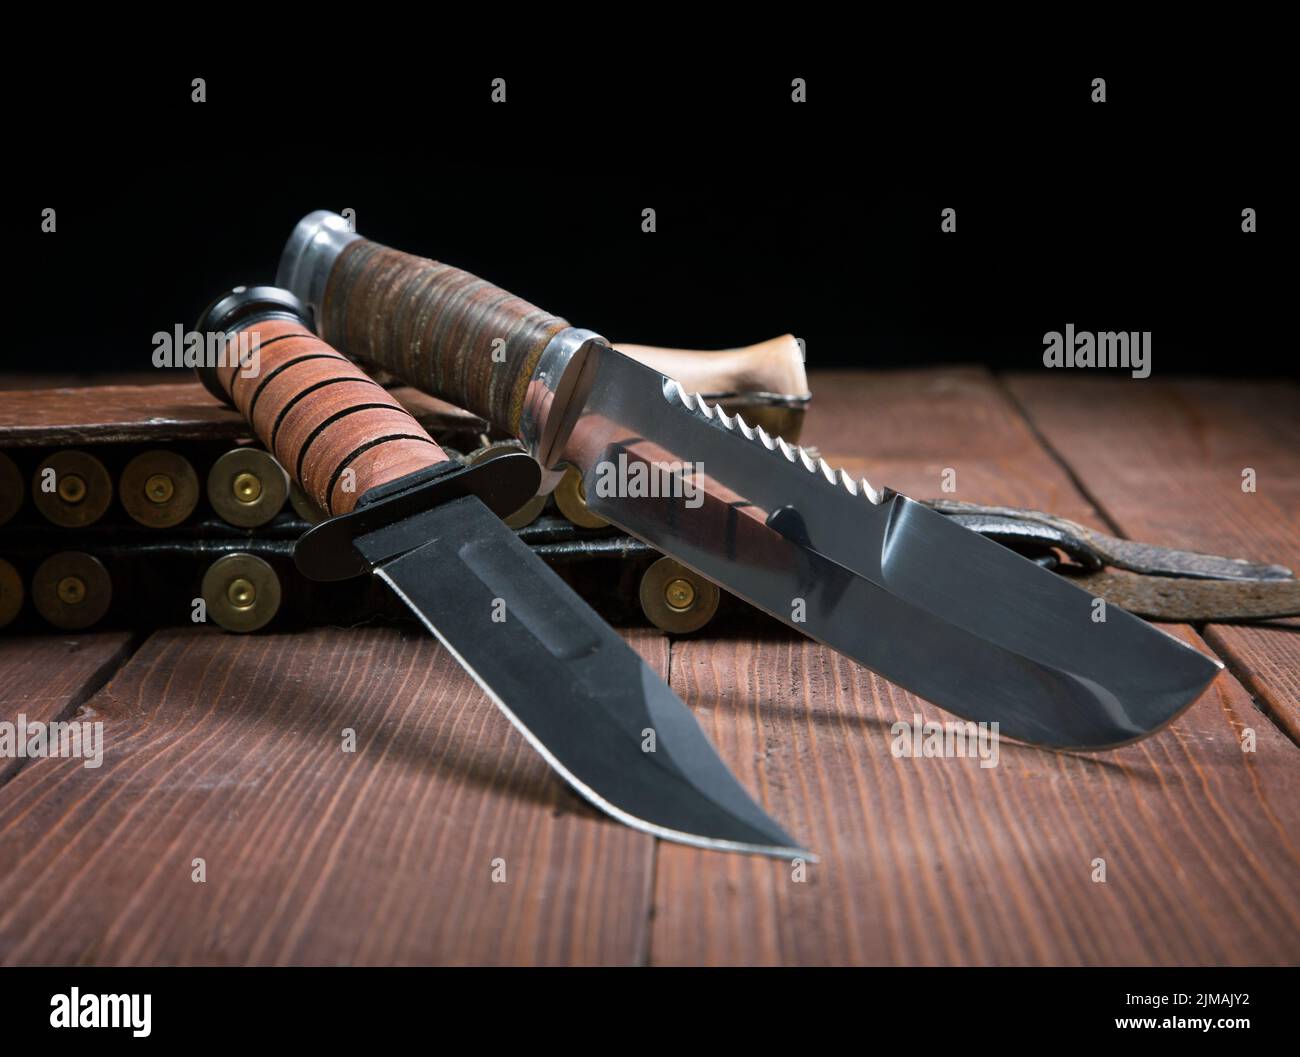 Still life with a knife and bandolier on a close-up table Stock Photo